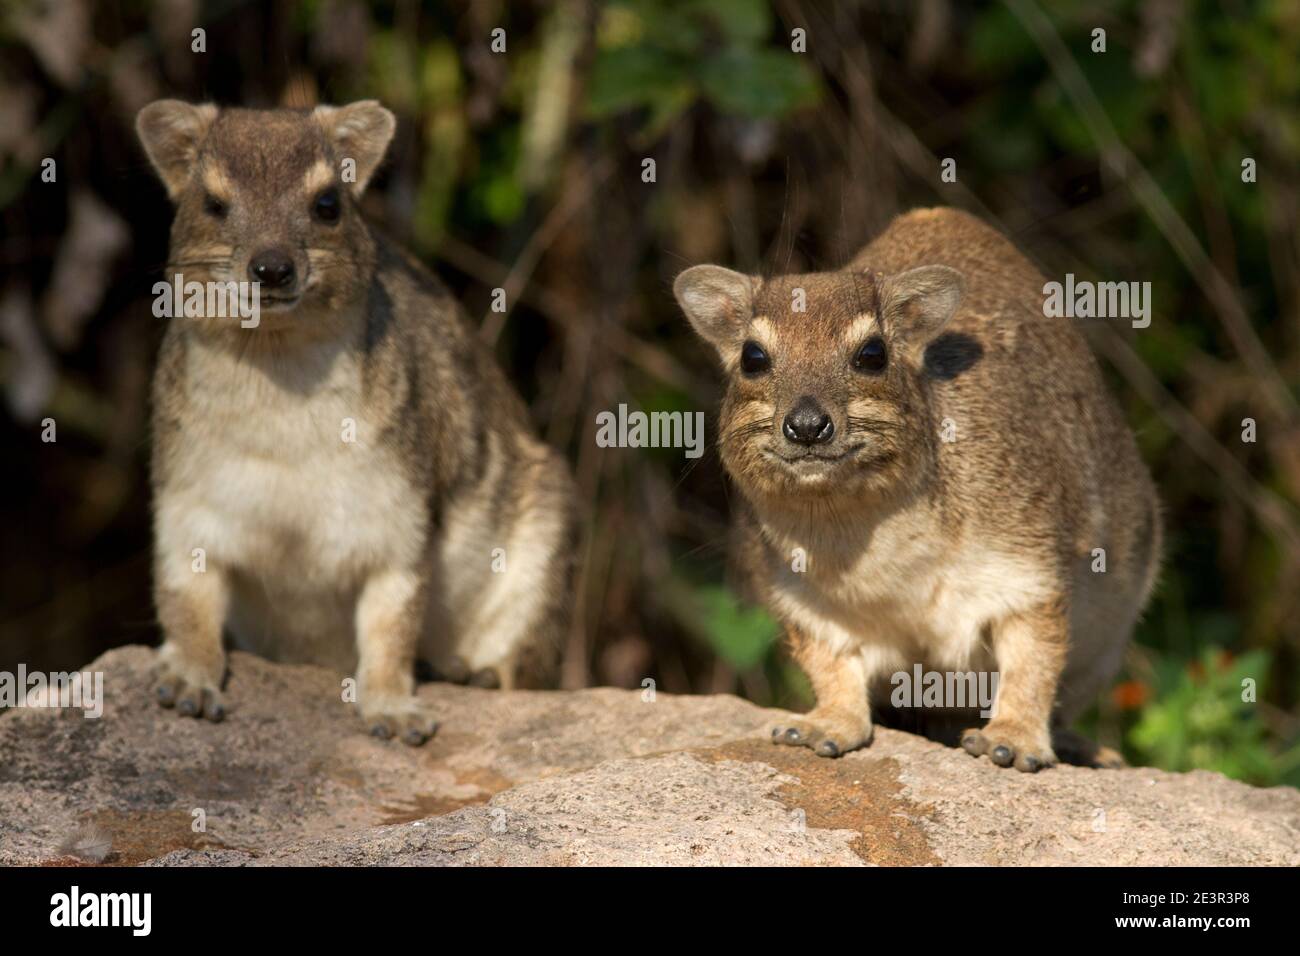 The Bush Hyrax is common in rocky areas and is very agile when it browses foliage up in trees and bushes, though it looks ill-equipped for climbing Stock Photo